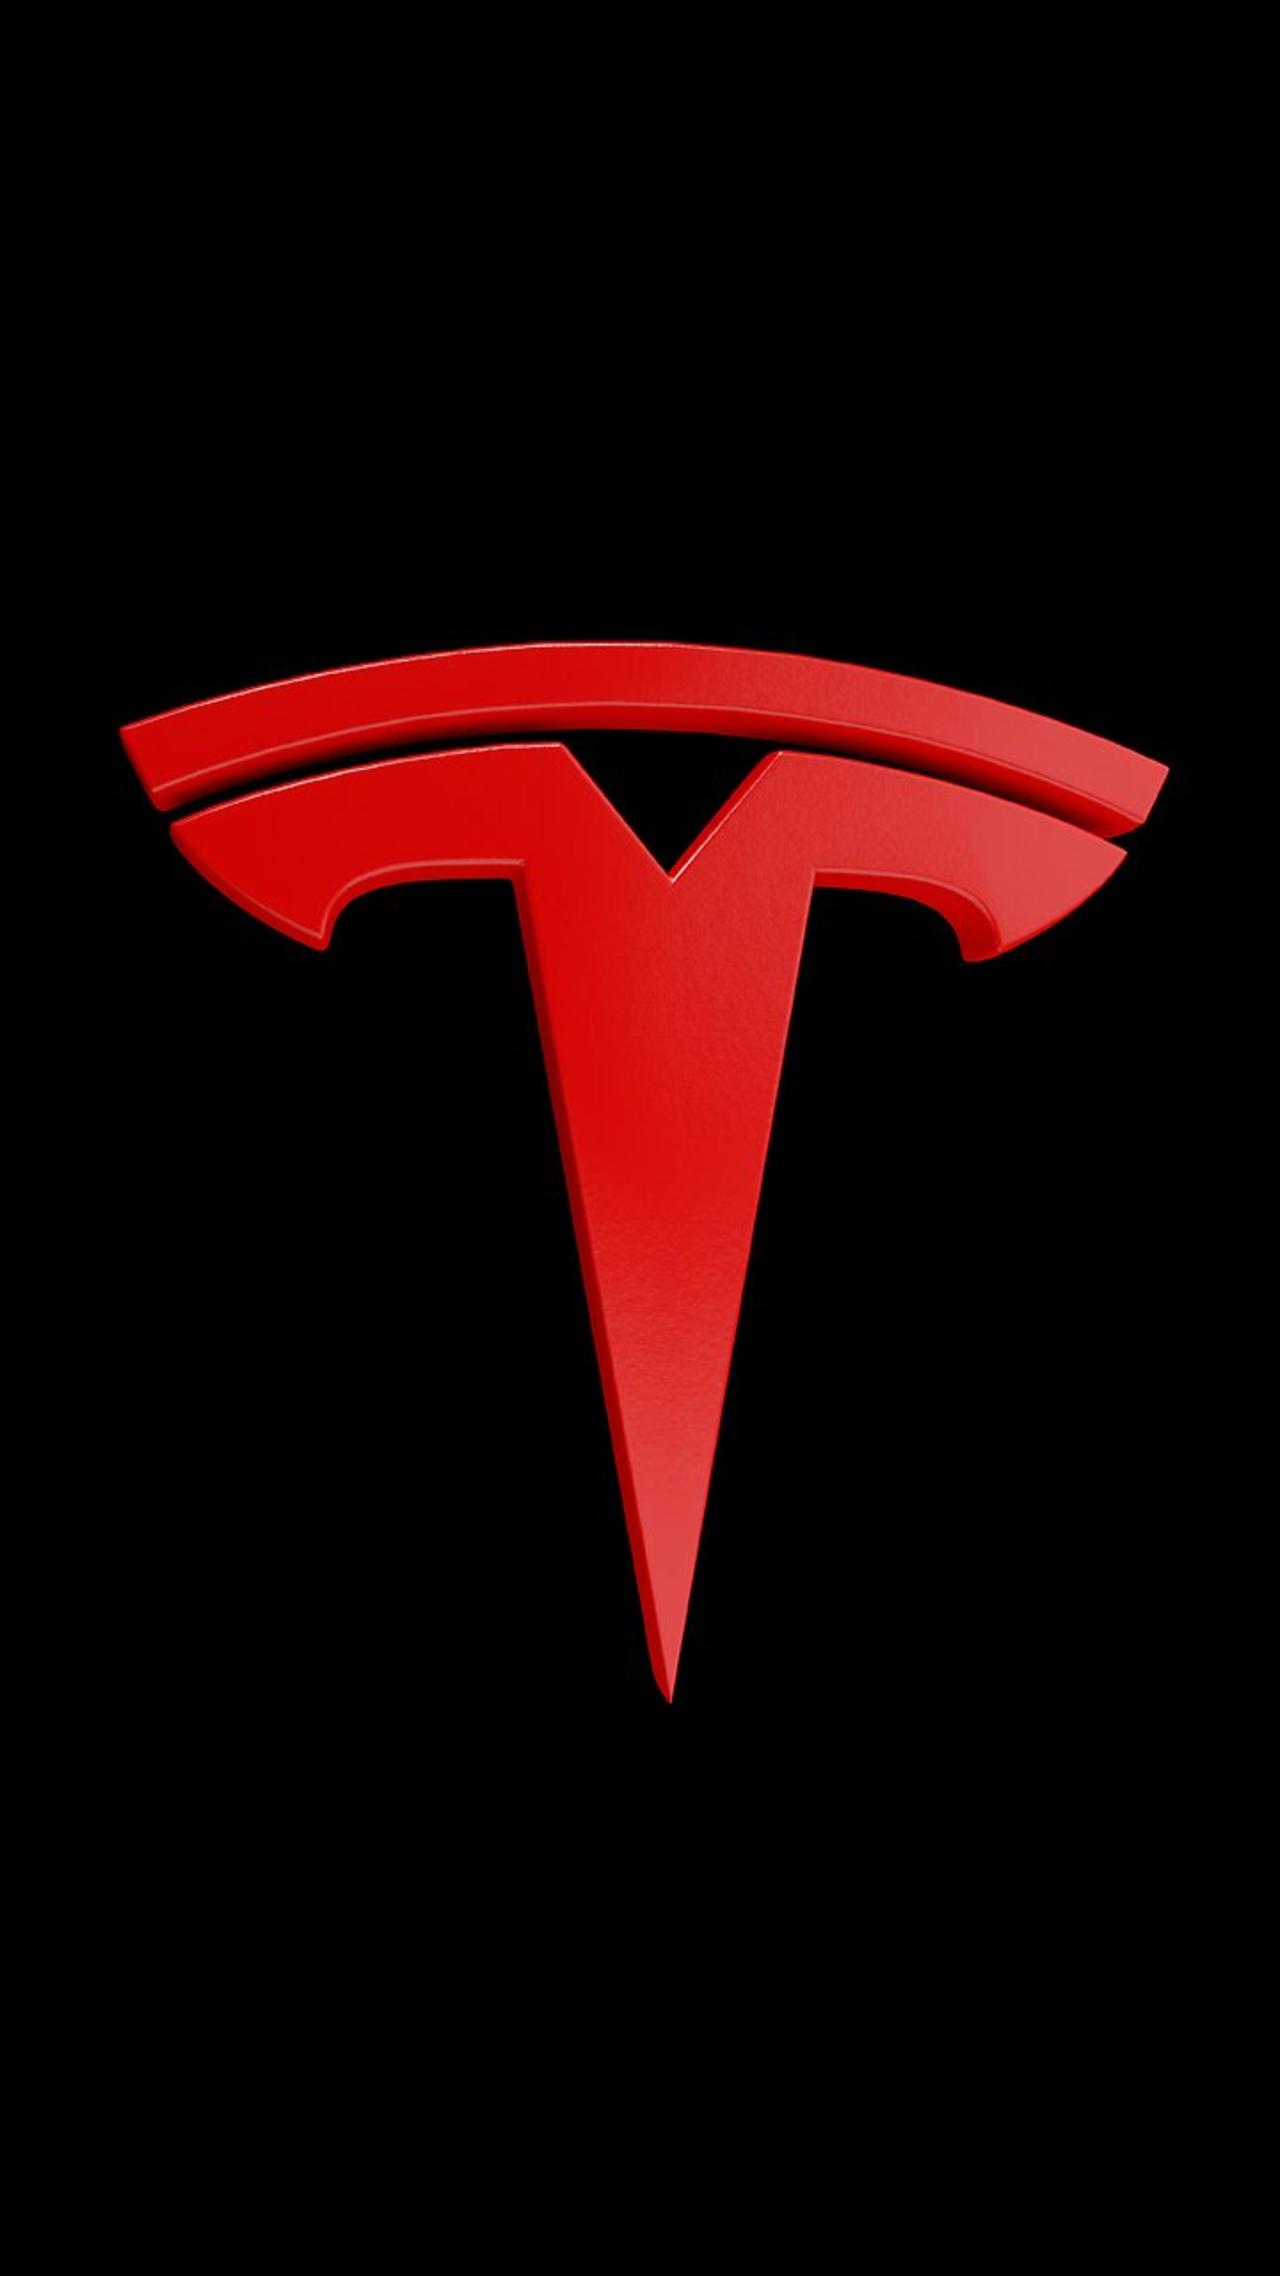 Tesla lays off ‘more than 10%’ of its global workforce